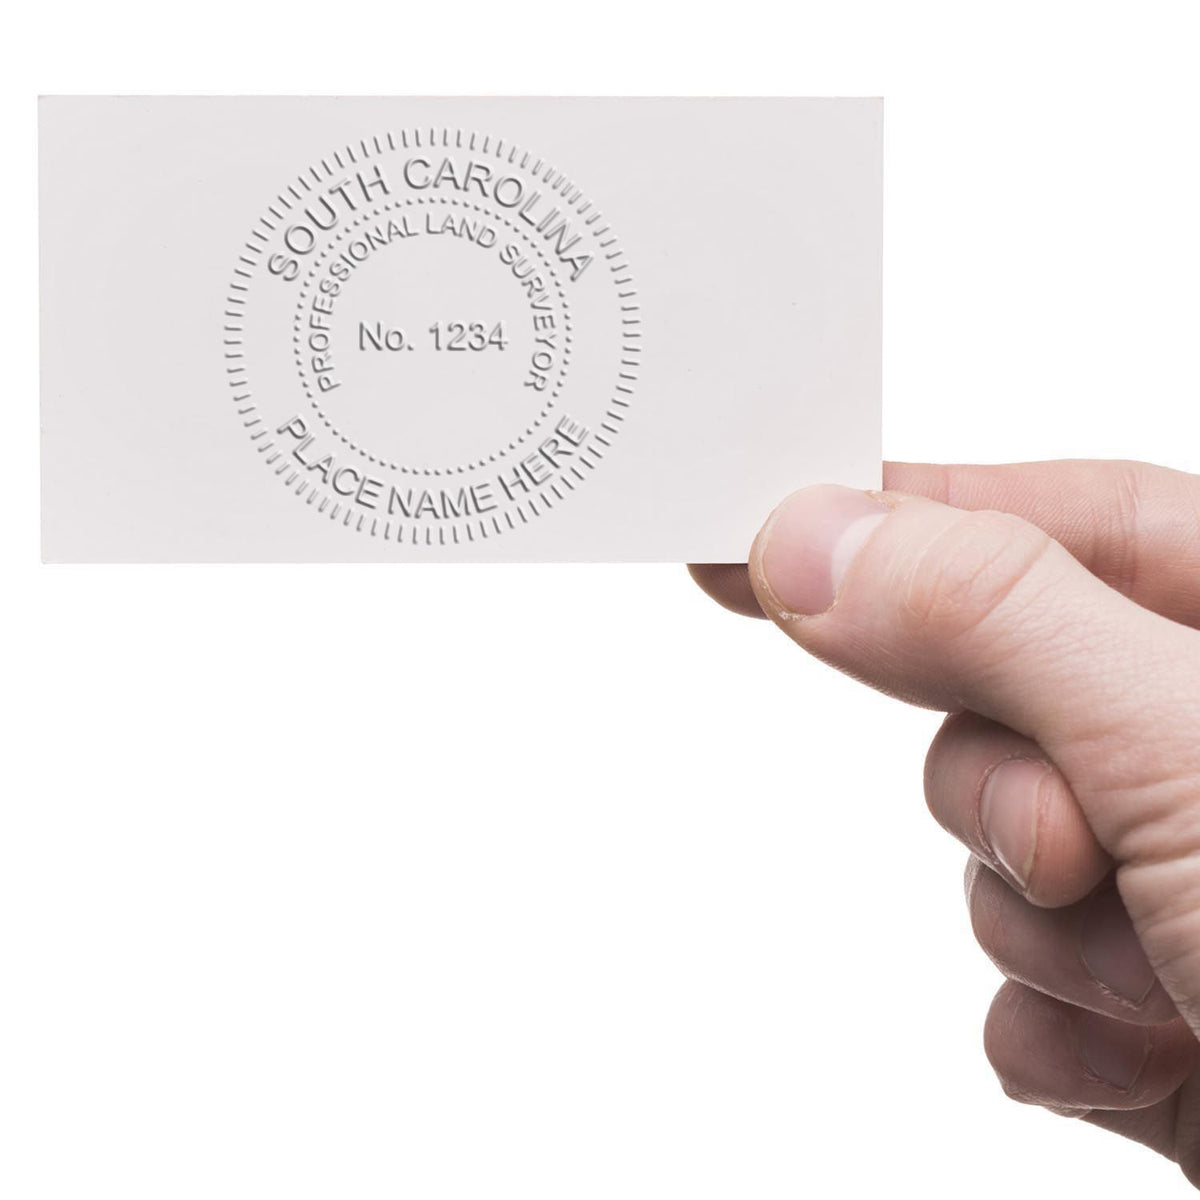 An in use photo of the Gift South Carolina Land Surveyor Seal showing a sample imprint on a cardstock